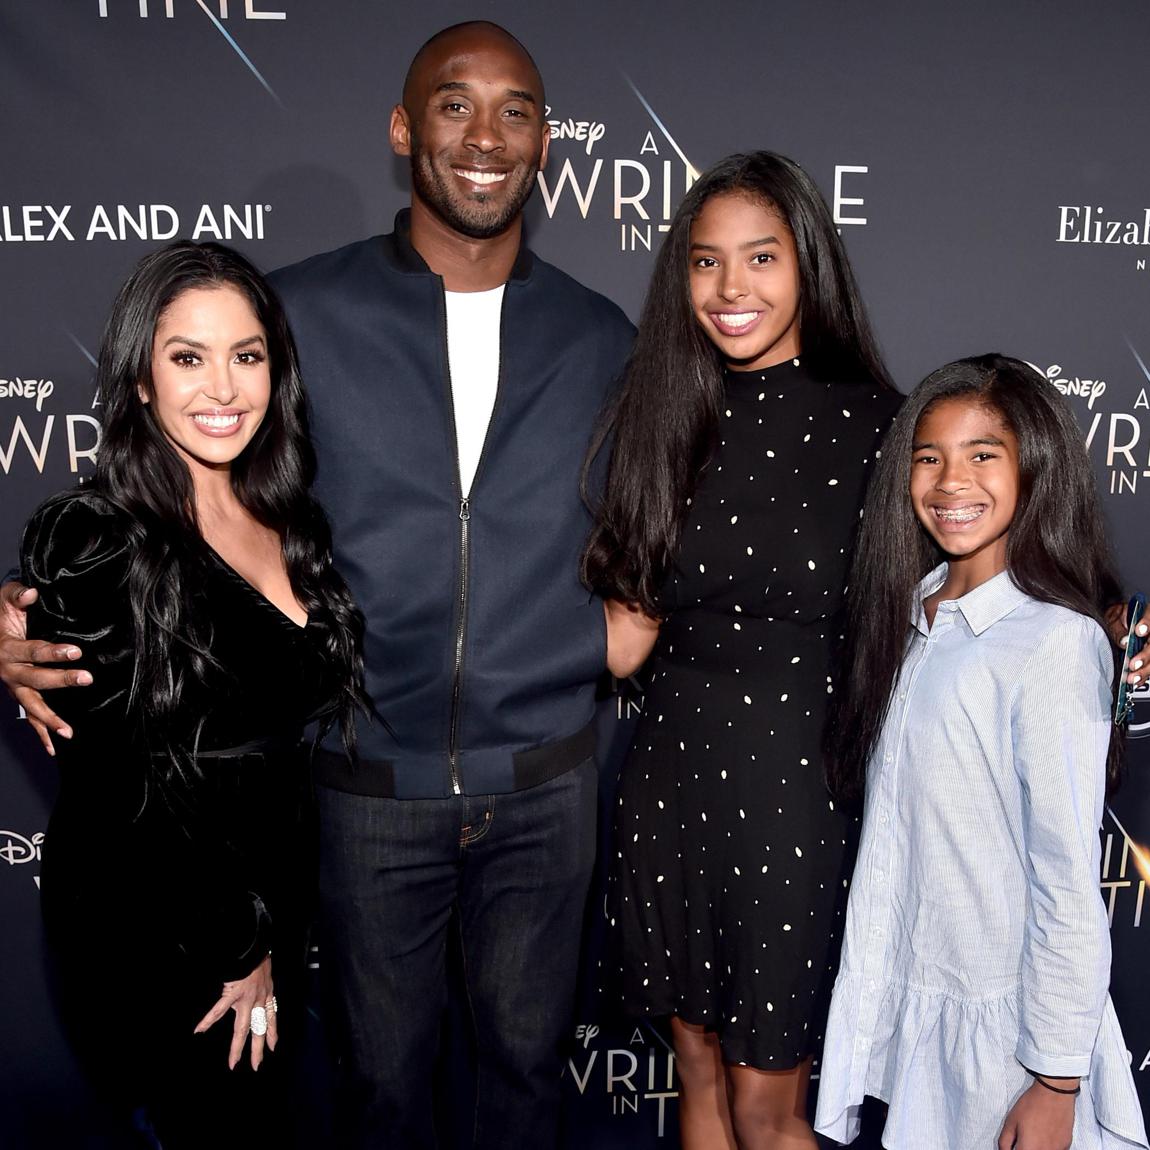 Kobe Bryant as a dad: The best photo with his family